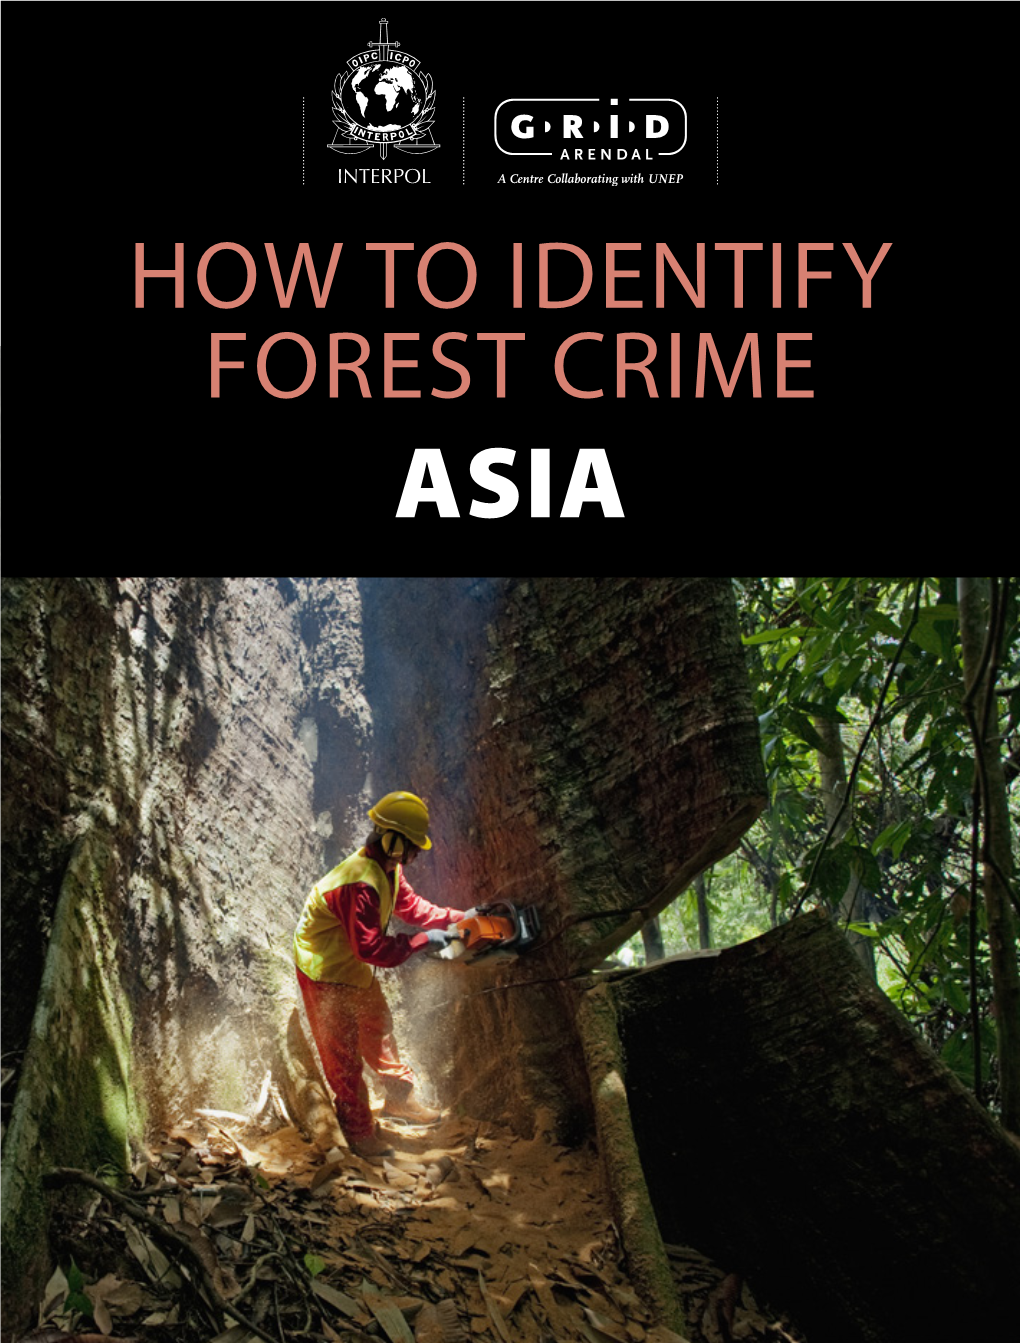 How to Identify Forest Crime Asia